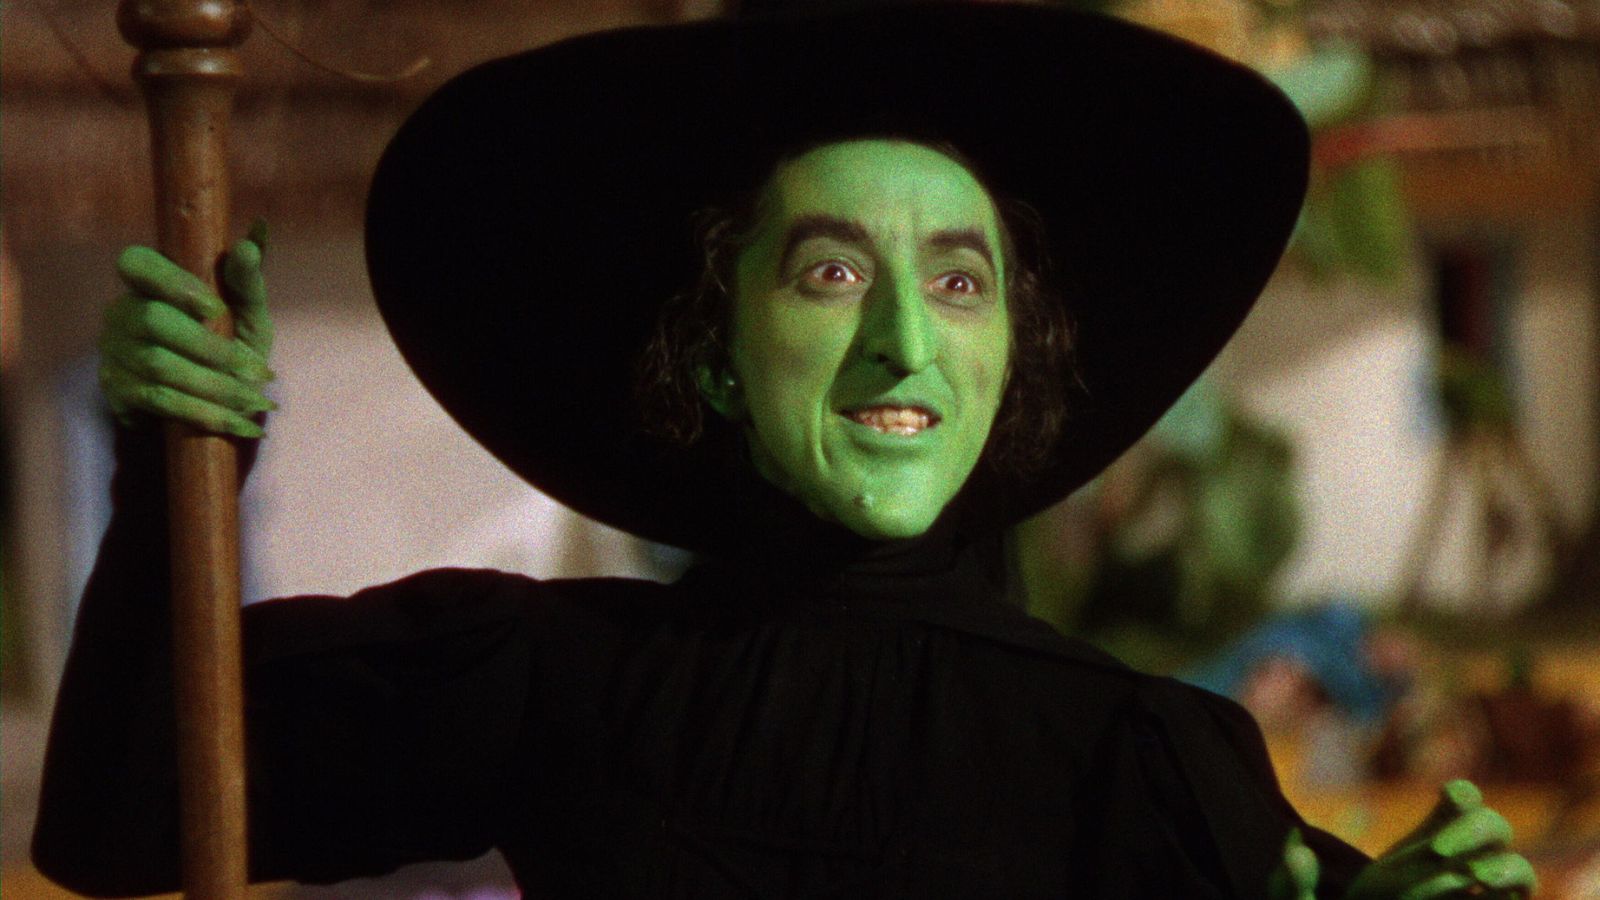 The Wicked Witch of the West - The Wizard of Oz